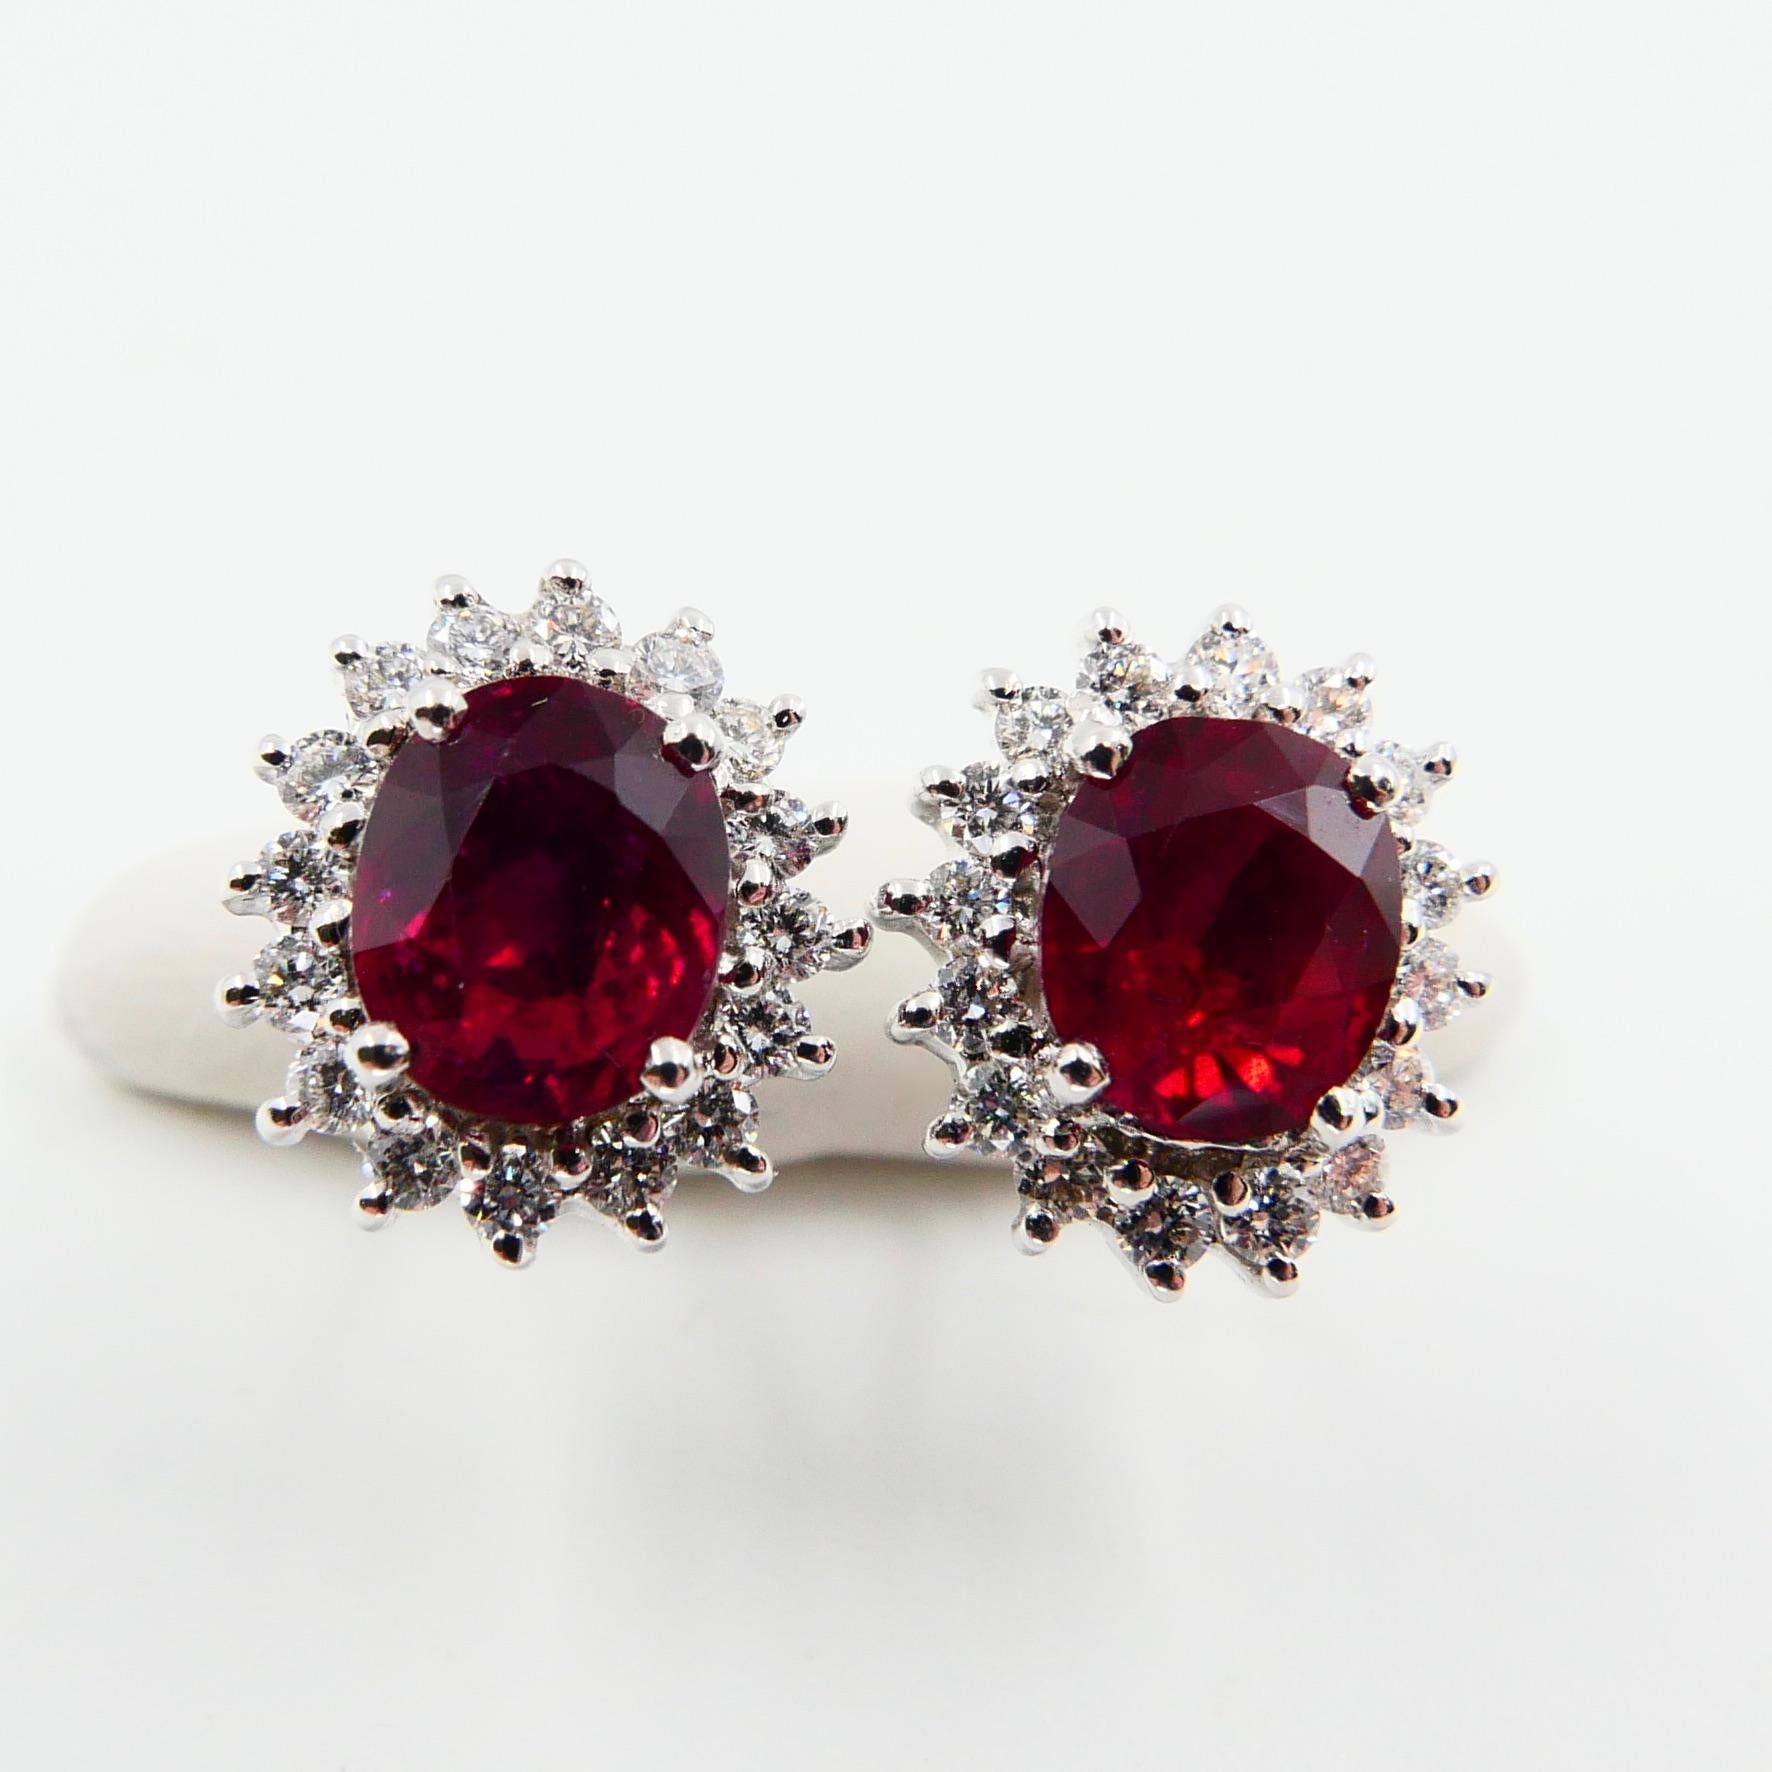 Oval Cut Vivid Red Ruby 2.09 Carat and Diamond Stud Earrings, Close to Pigeon Blood Red